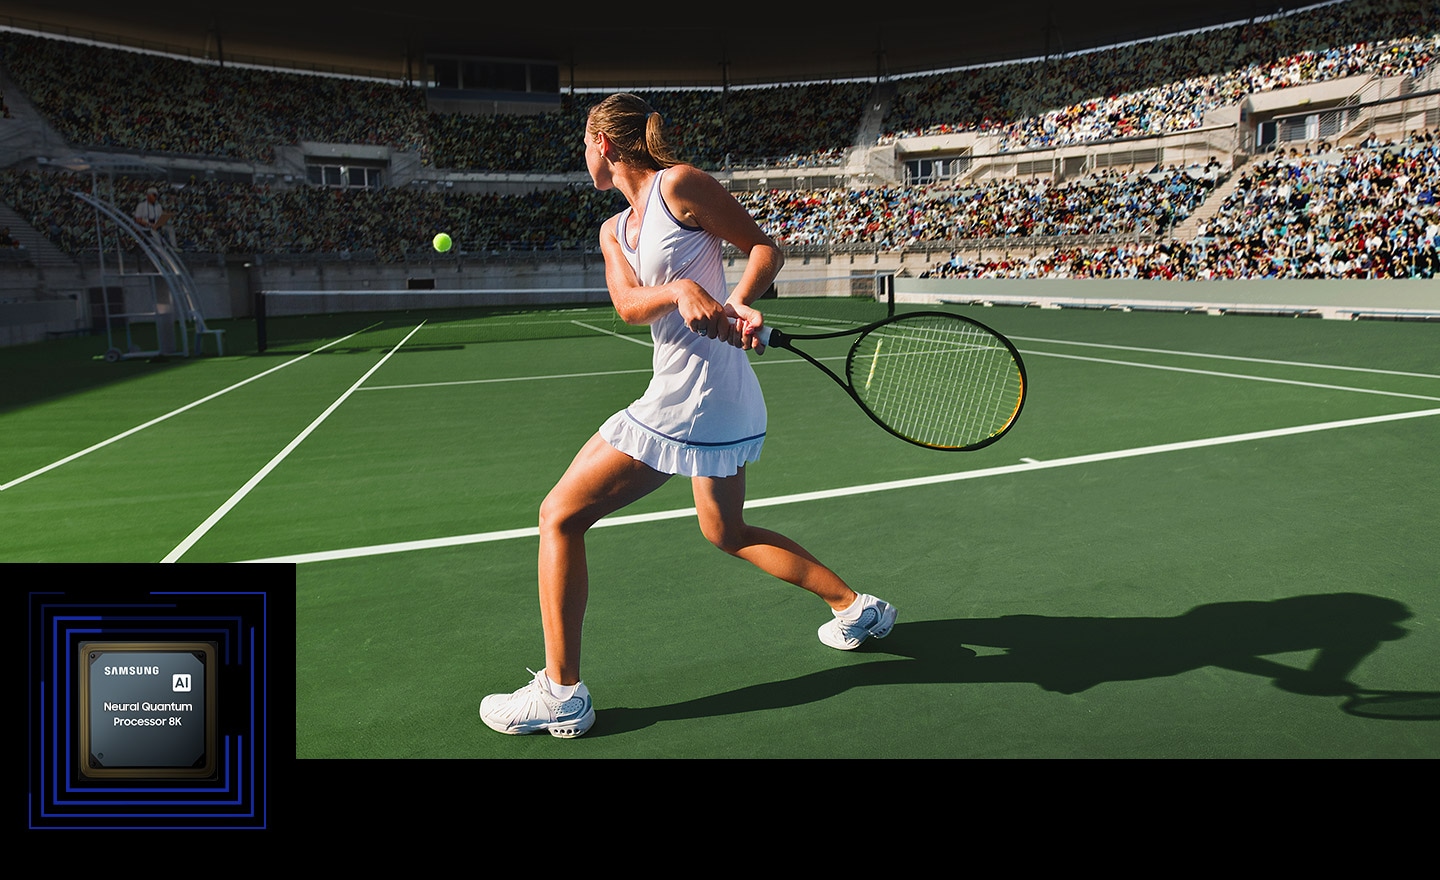 Various elements of the tennis match including tennis ball, tennis court sidelines, tennis racket and audience are highlighted on screen. It shows the Samsung AI Neural Quantum Processor 8K's ability to improve quality in real-time.